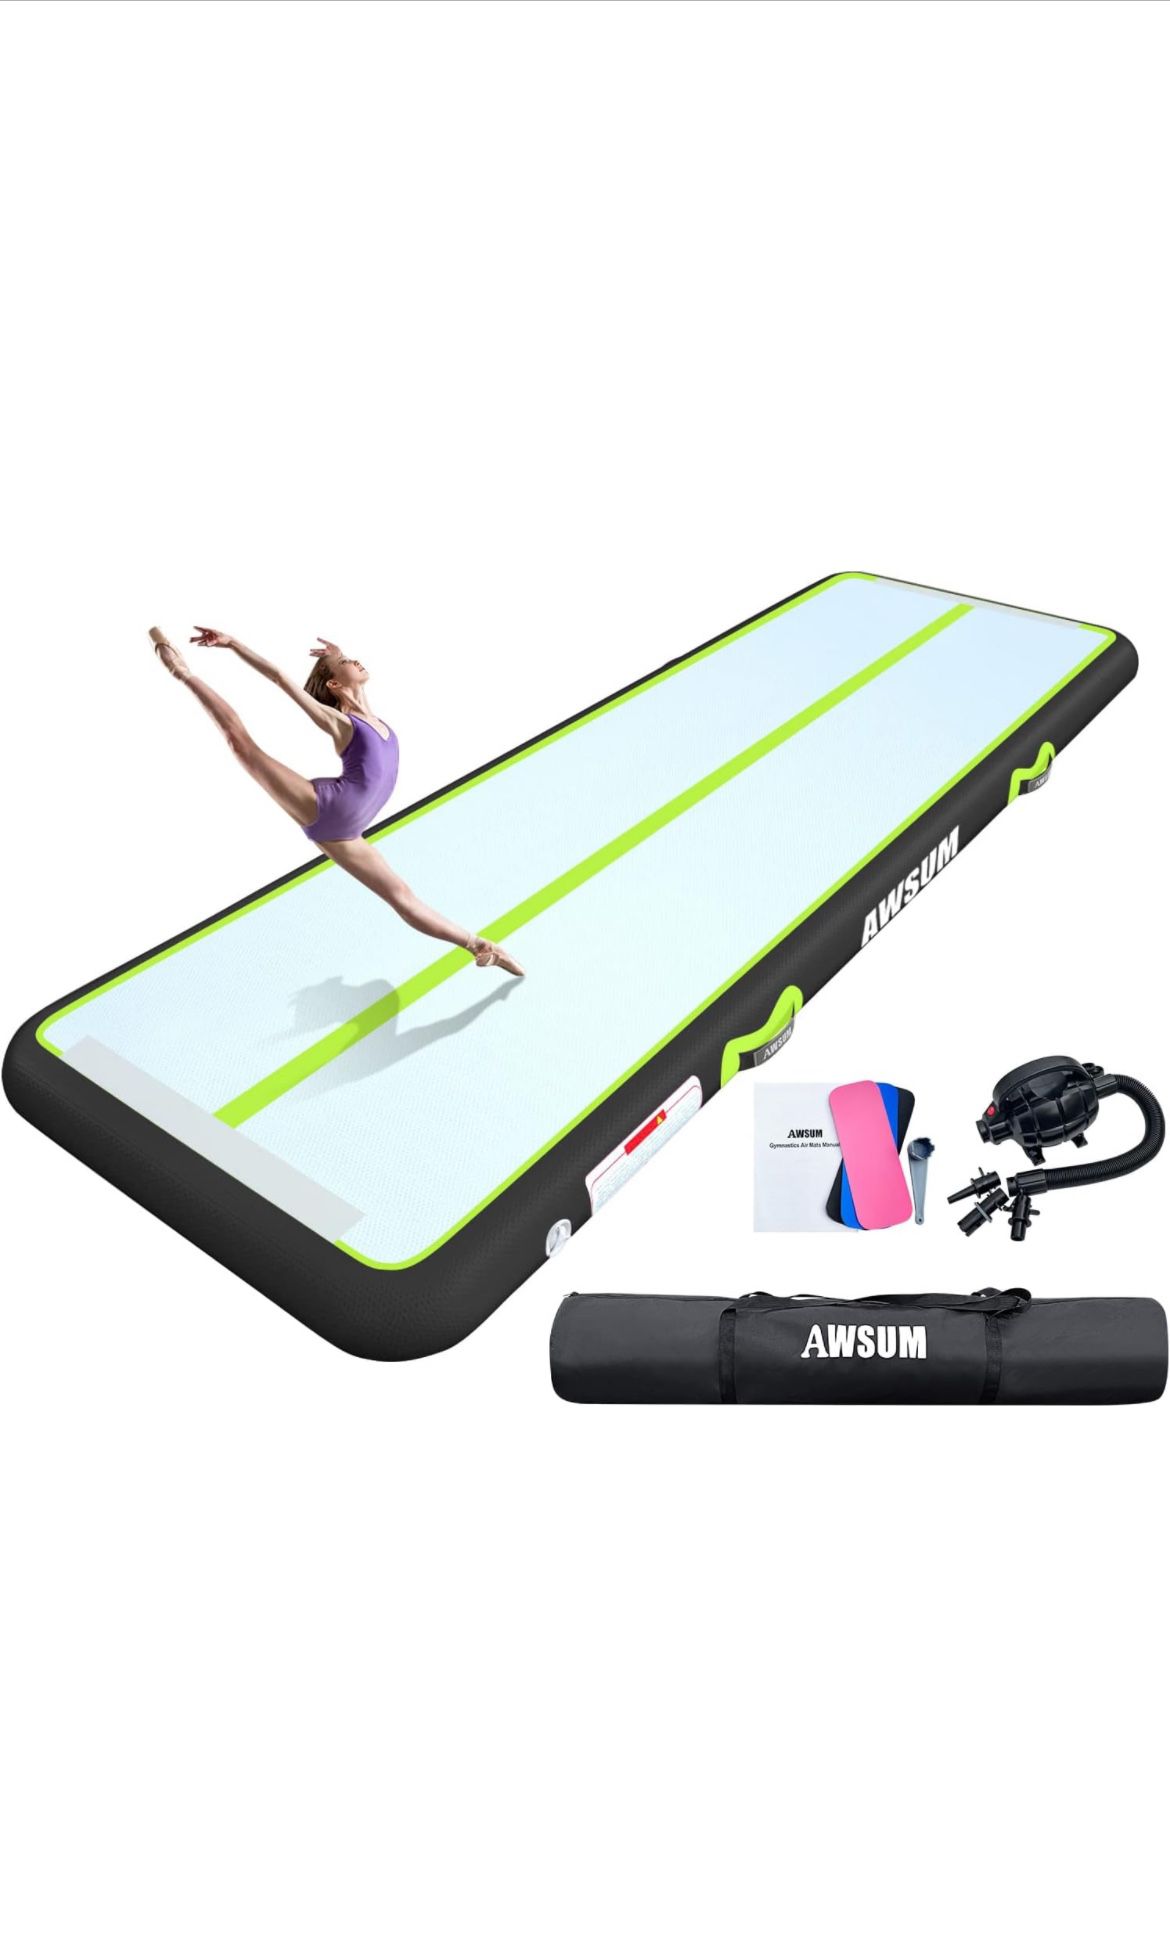 Inflatable Air Gymnastics Mat 6.6ft x3.3ft Training mat 4 inches Thick tumbling mat w/ electric pump